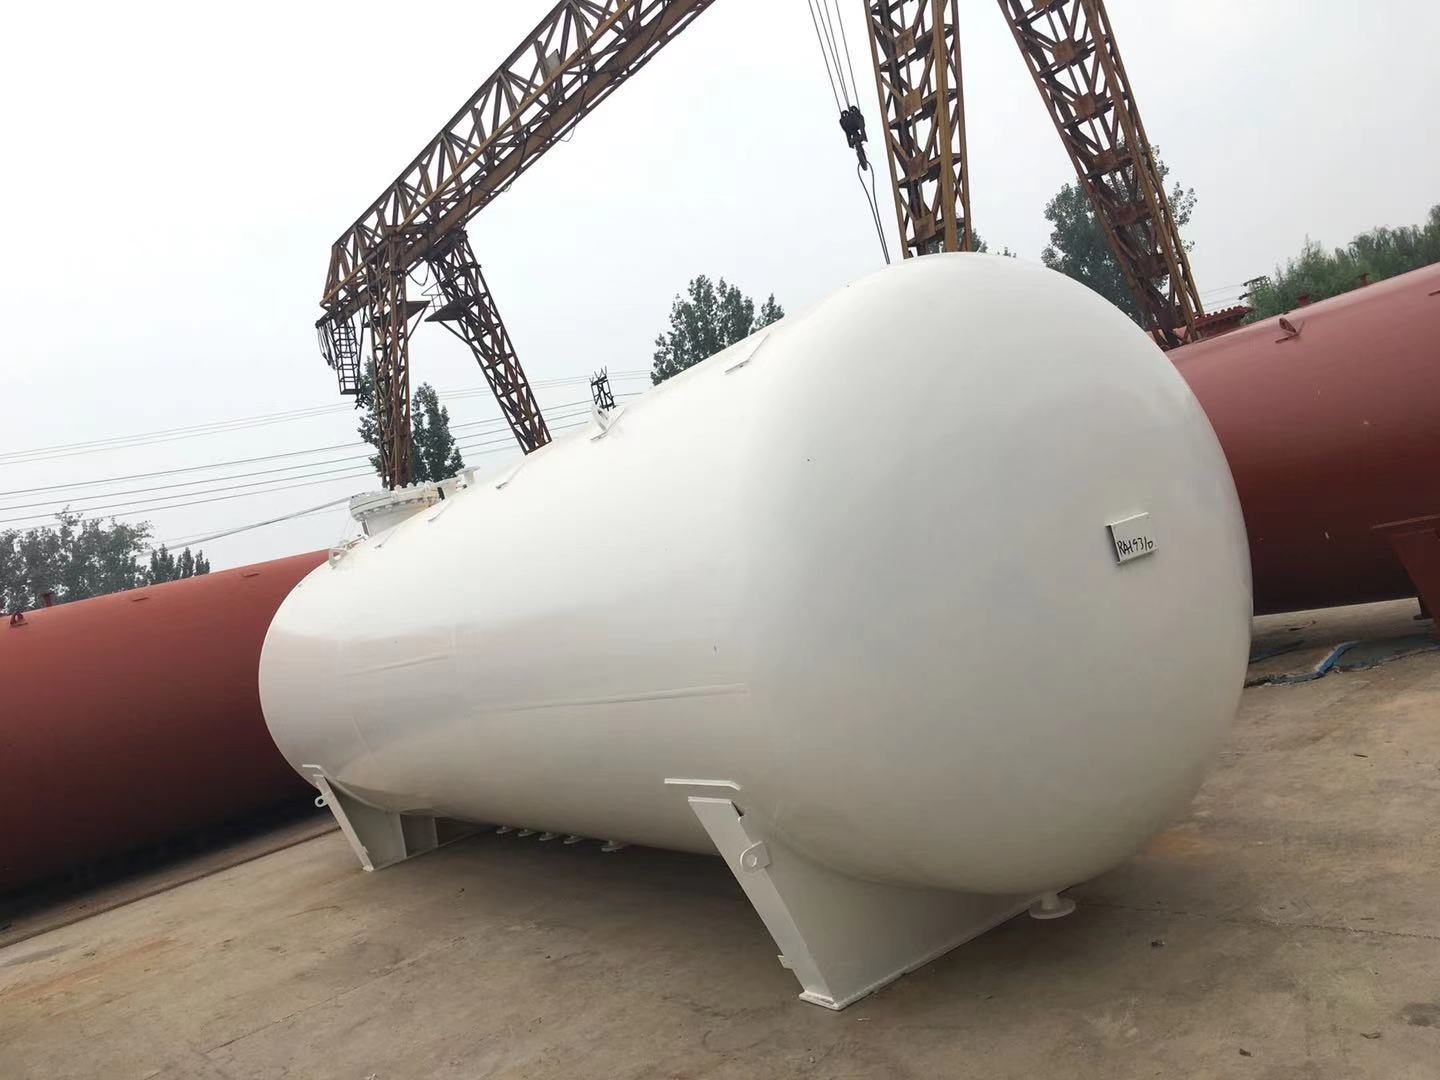 The structure of the liquefied gas storage tank